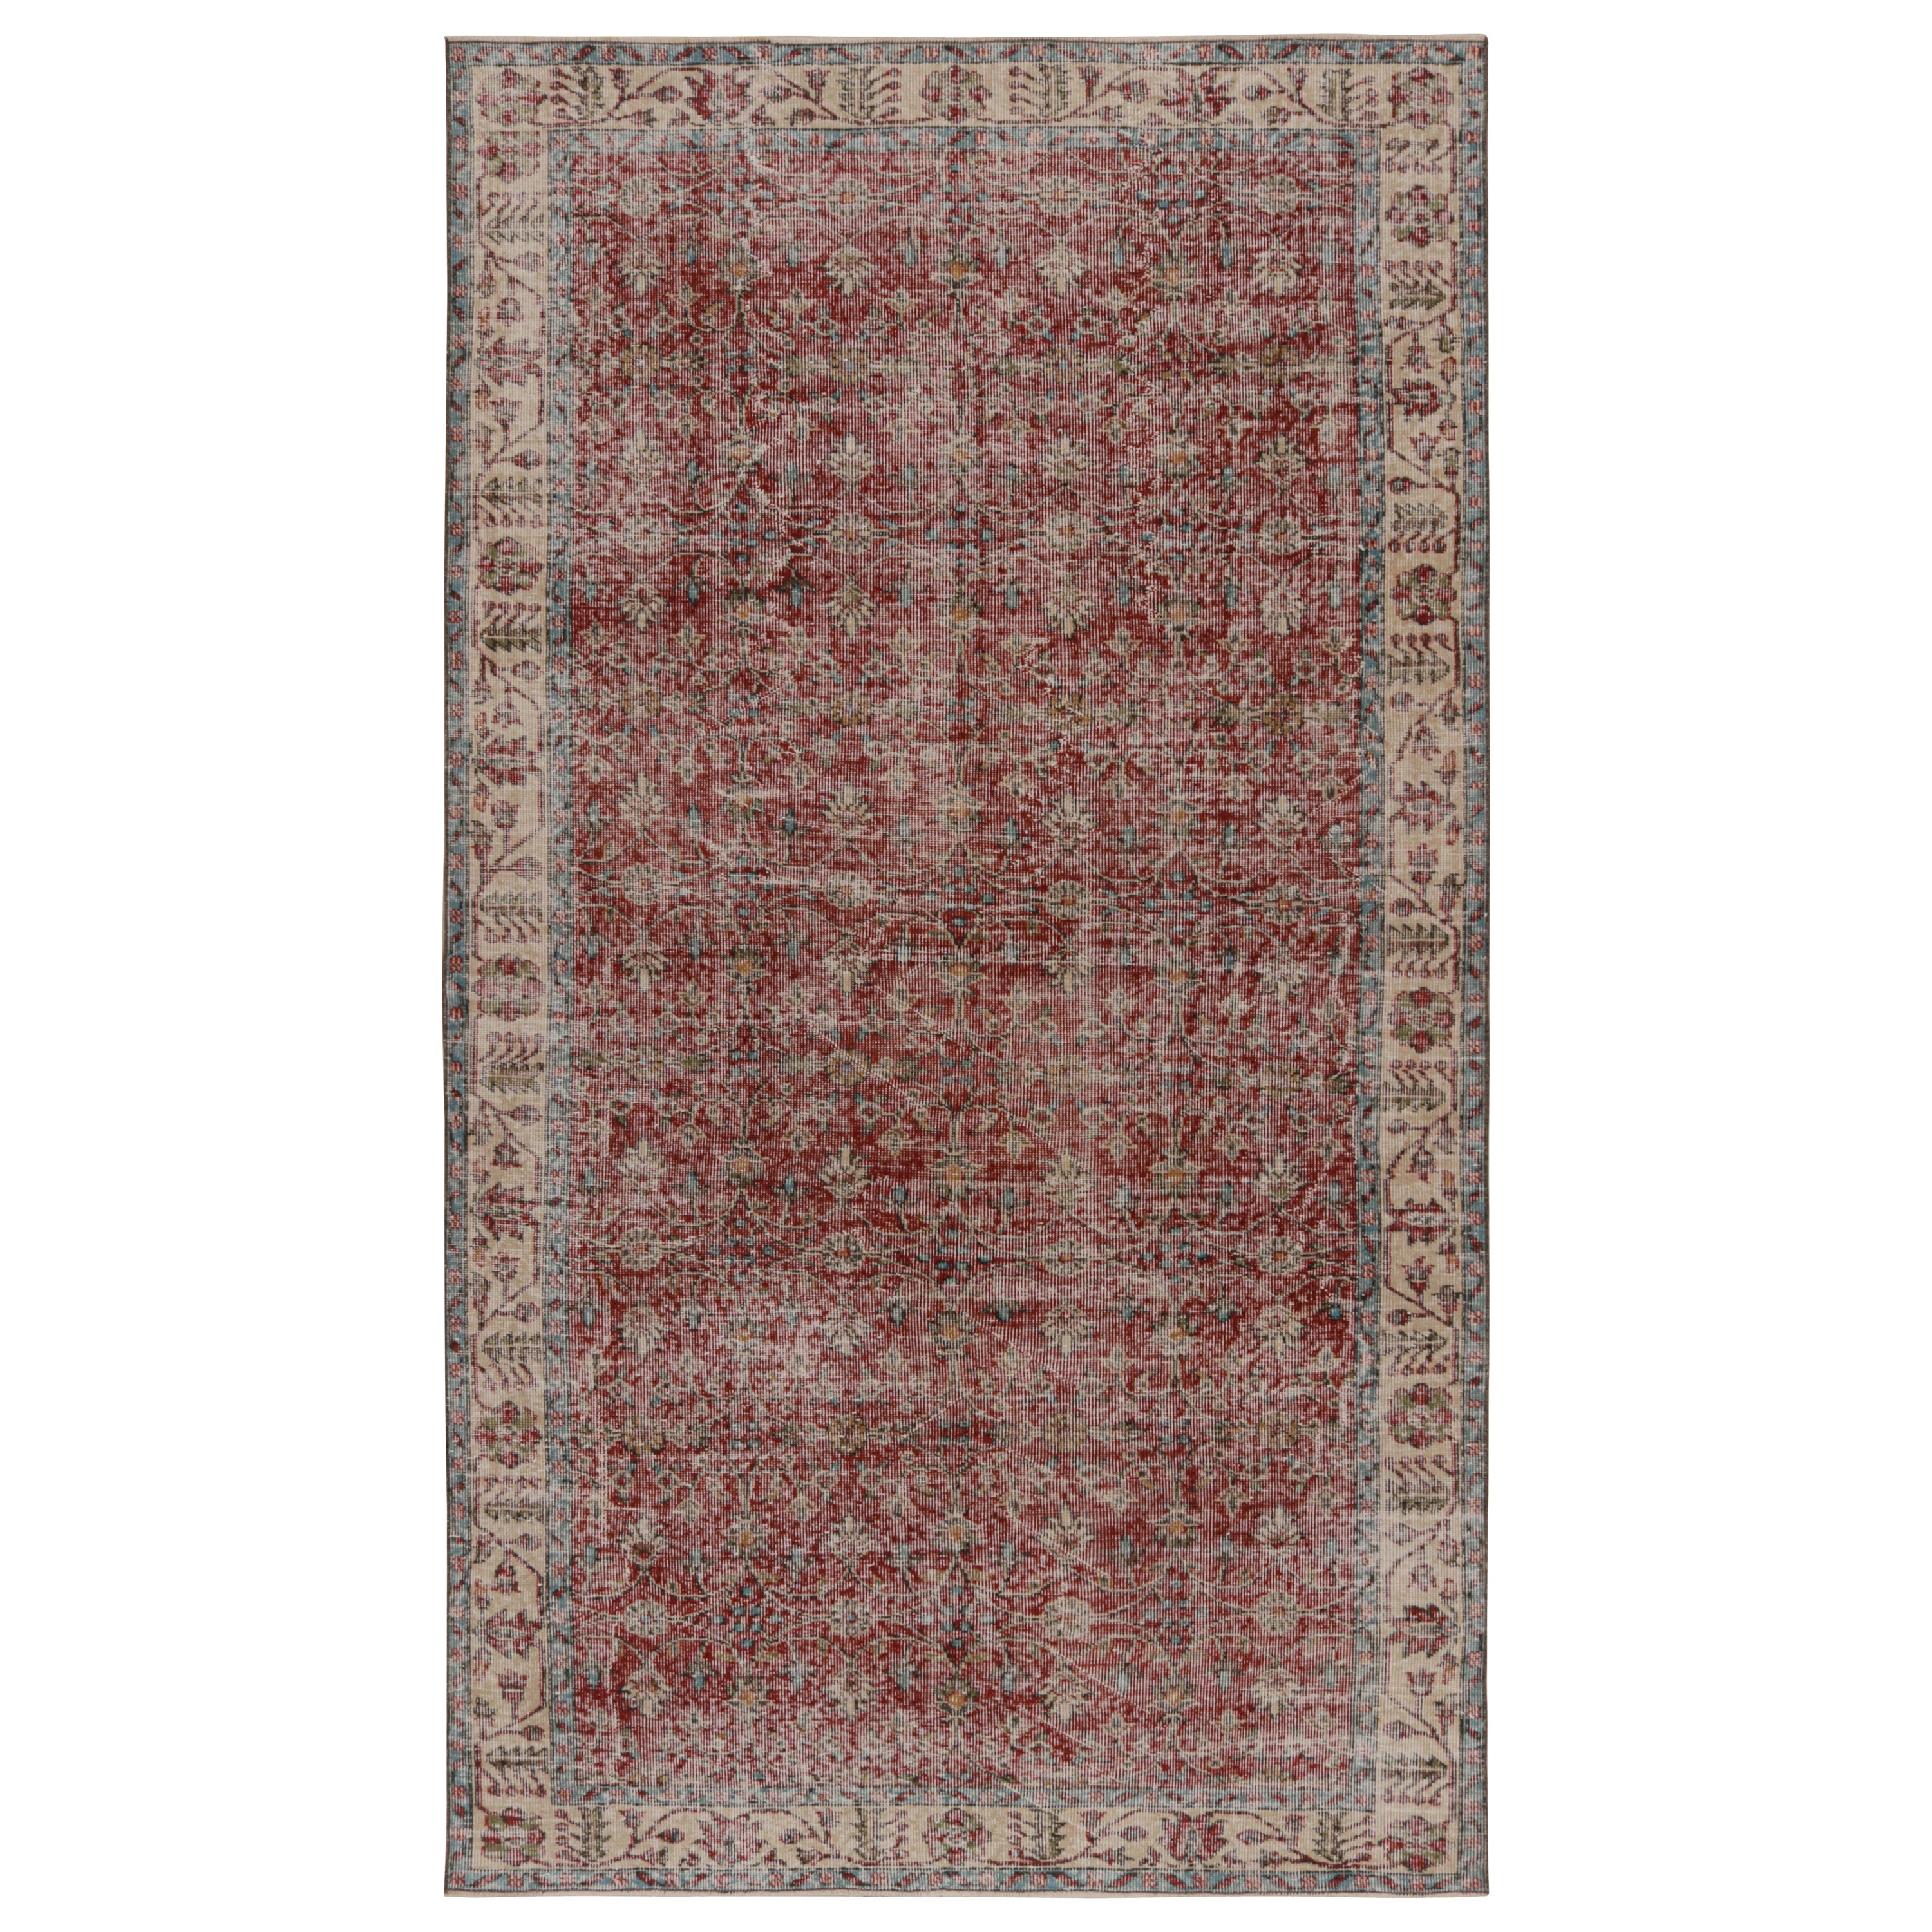 Vintage Turkish Rug in Red with Floral Patterns, from Rug & Kilim